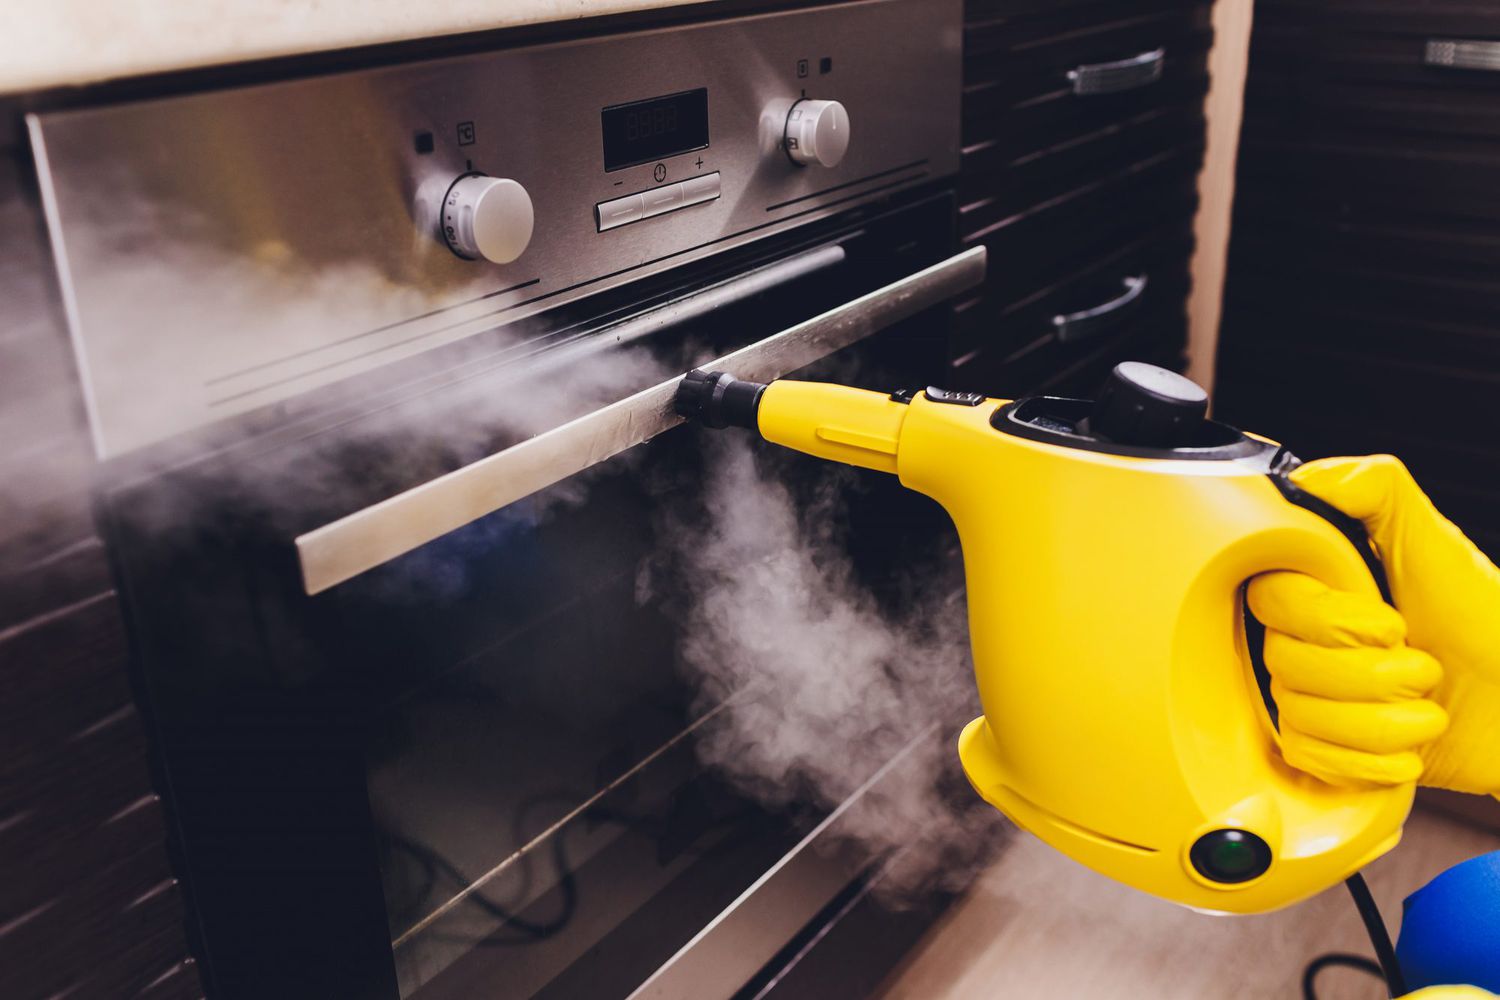 20 Things You Can Clean With A Steamer: For Quick, Easy Hygiene